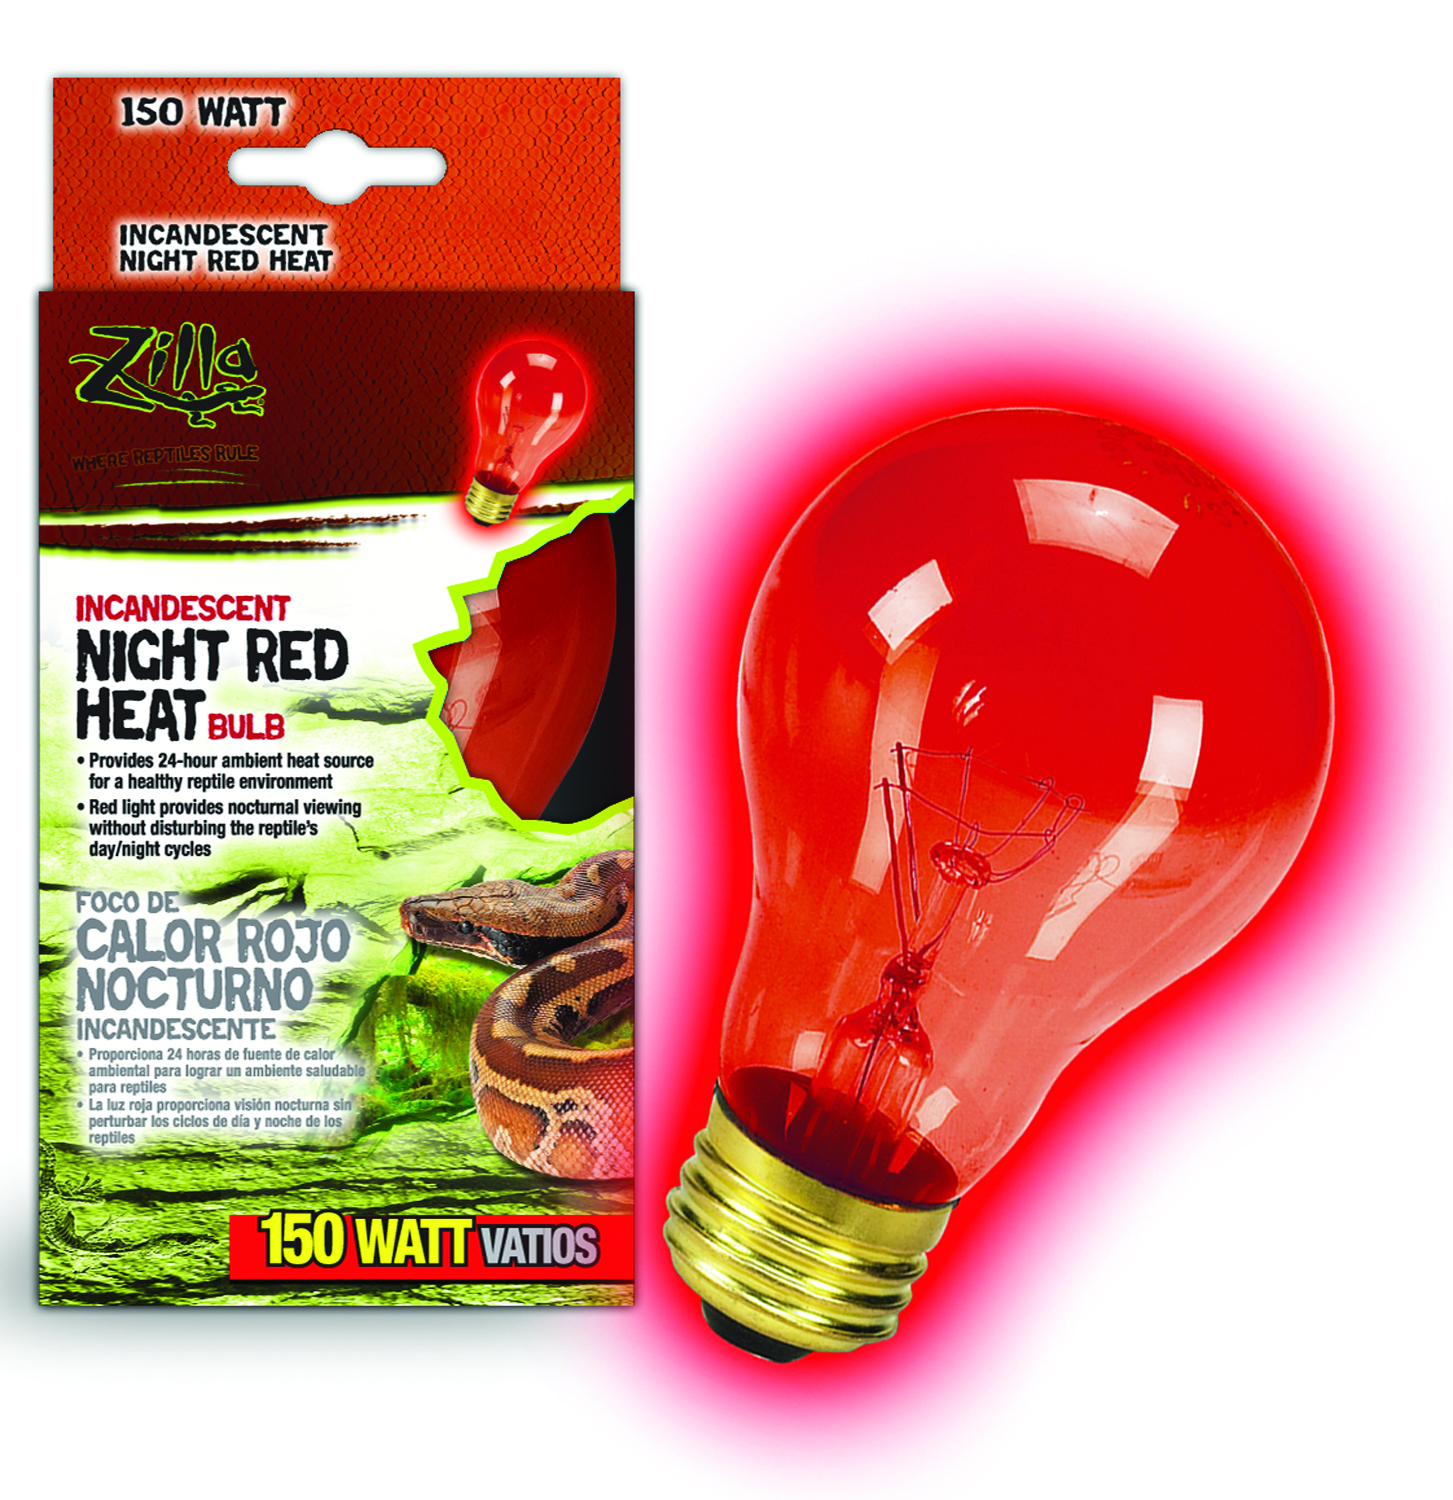 NIGHT RED INCANDESCENT BULB